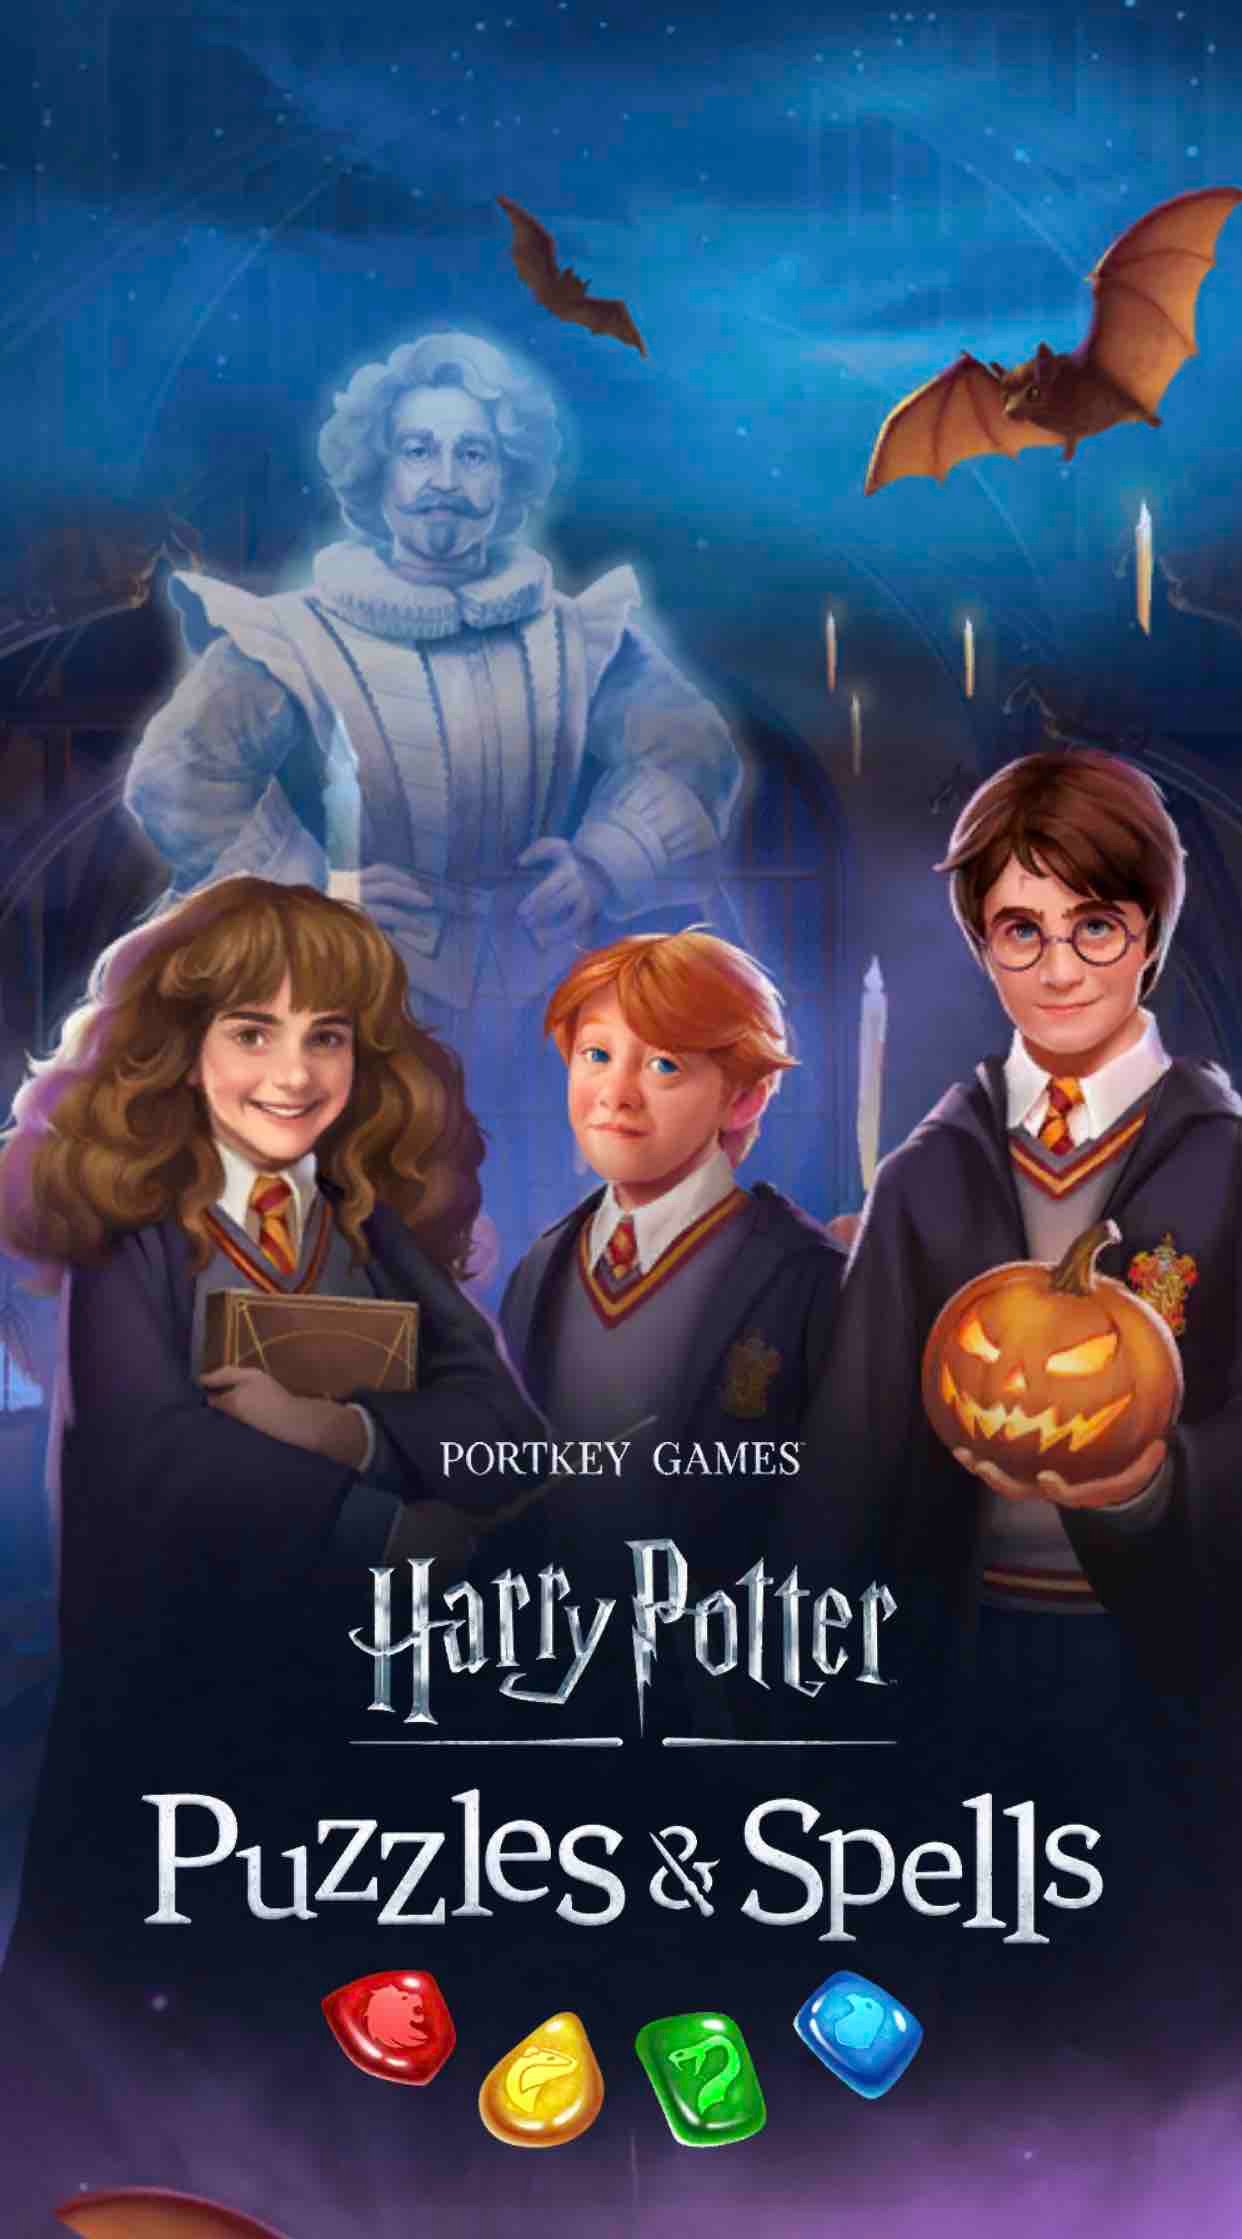 Harry Potter Puzzles & Spells Halloween Game Title Graphic